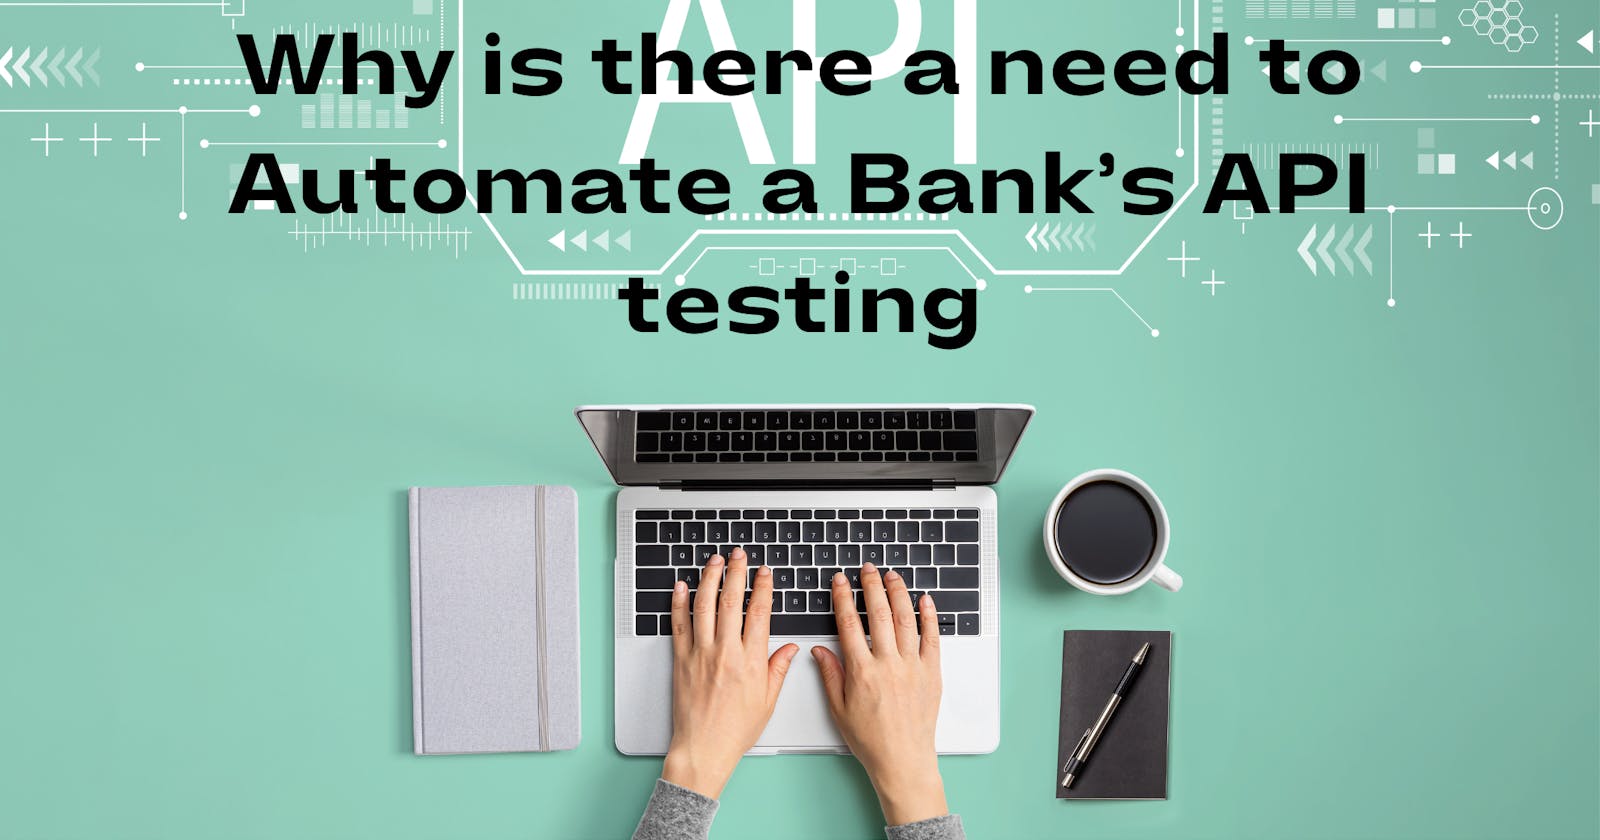 Why There is a Need to Automate a Bank’s API Testing